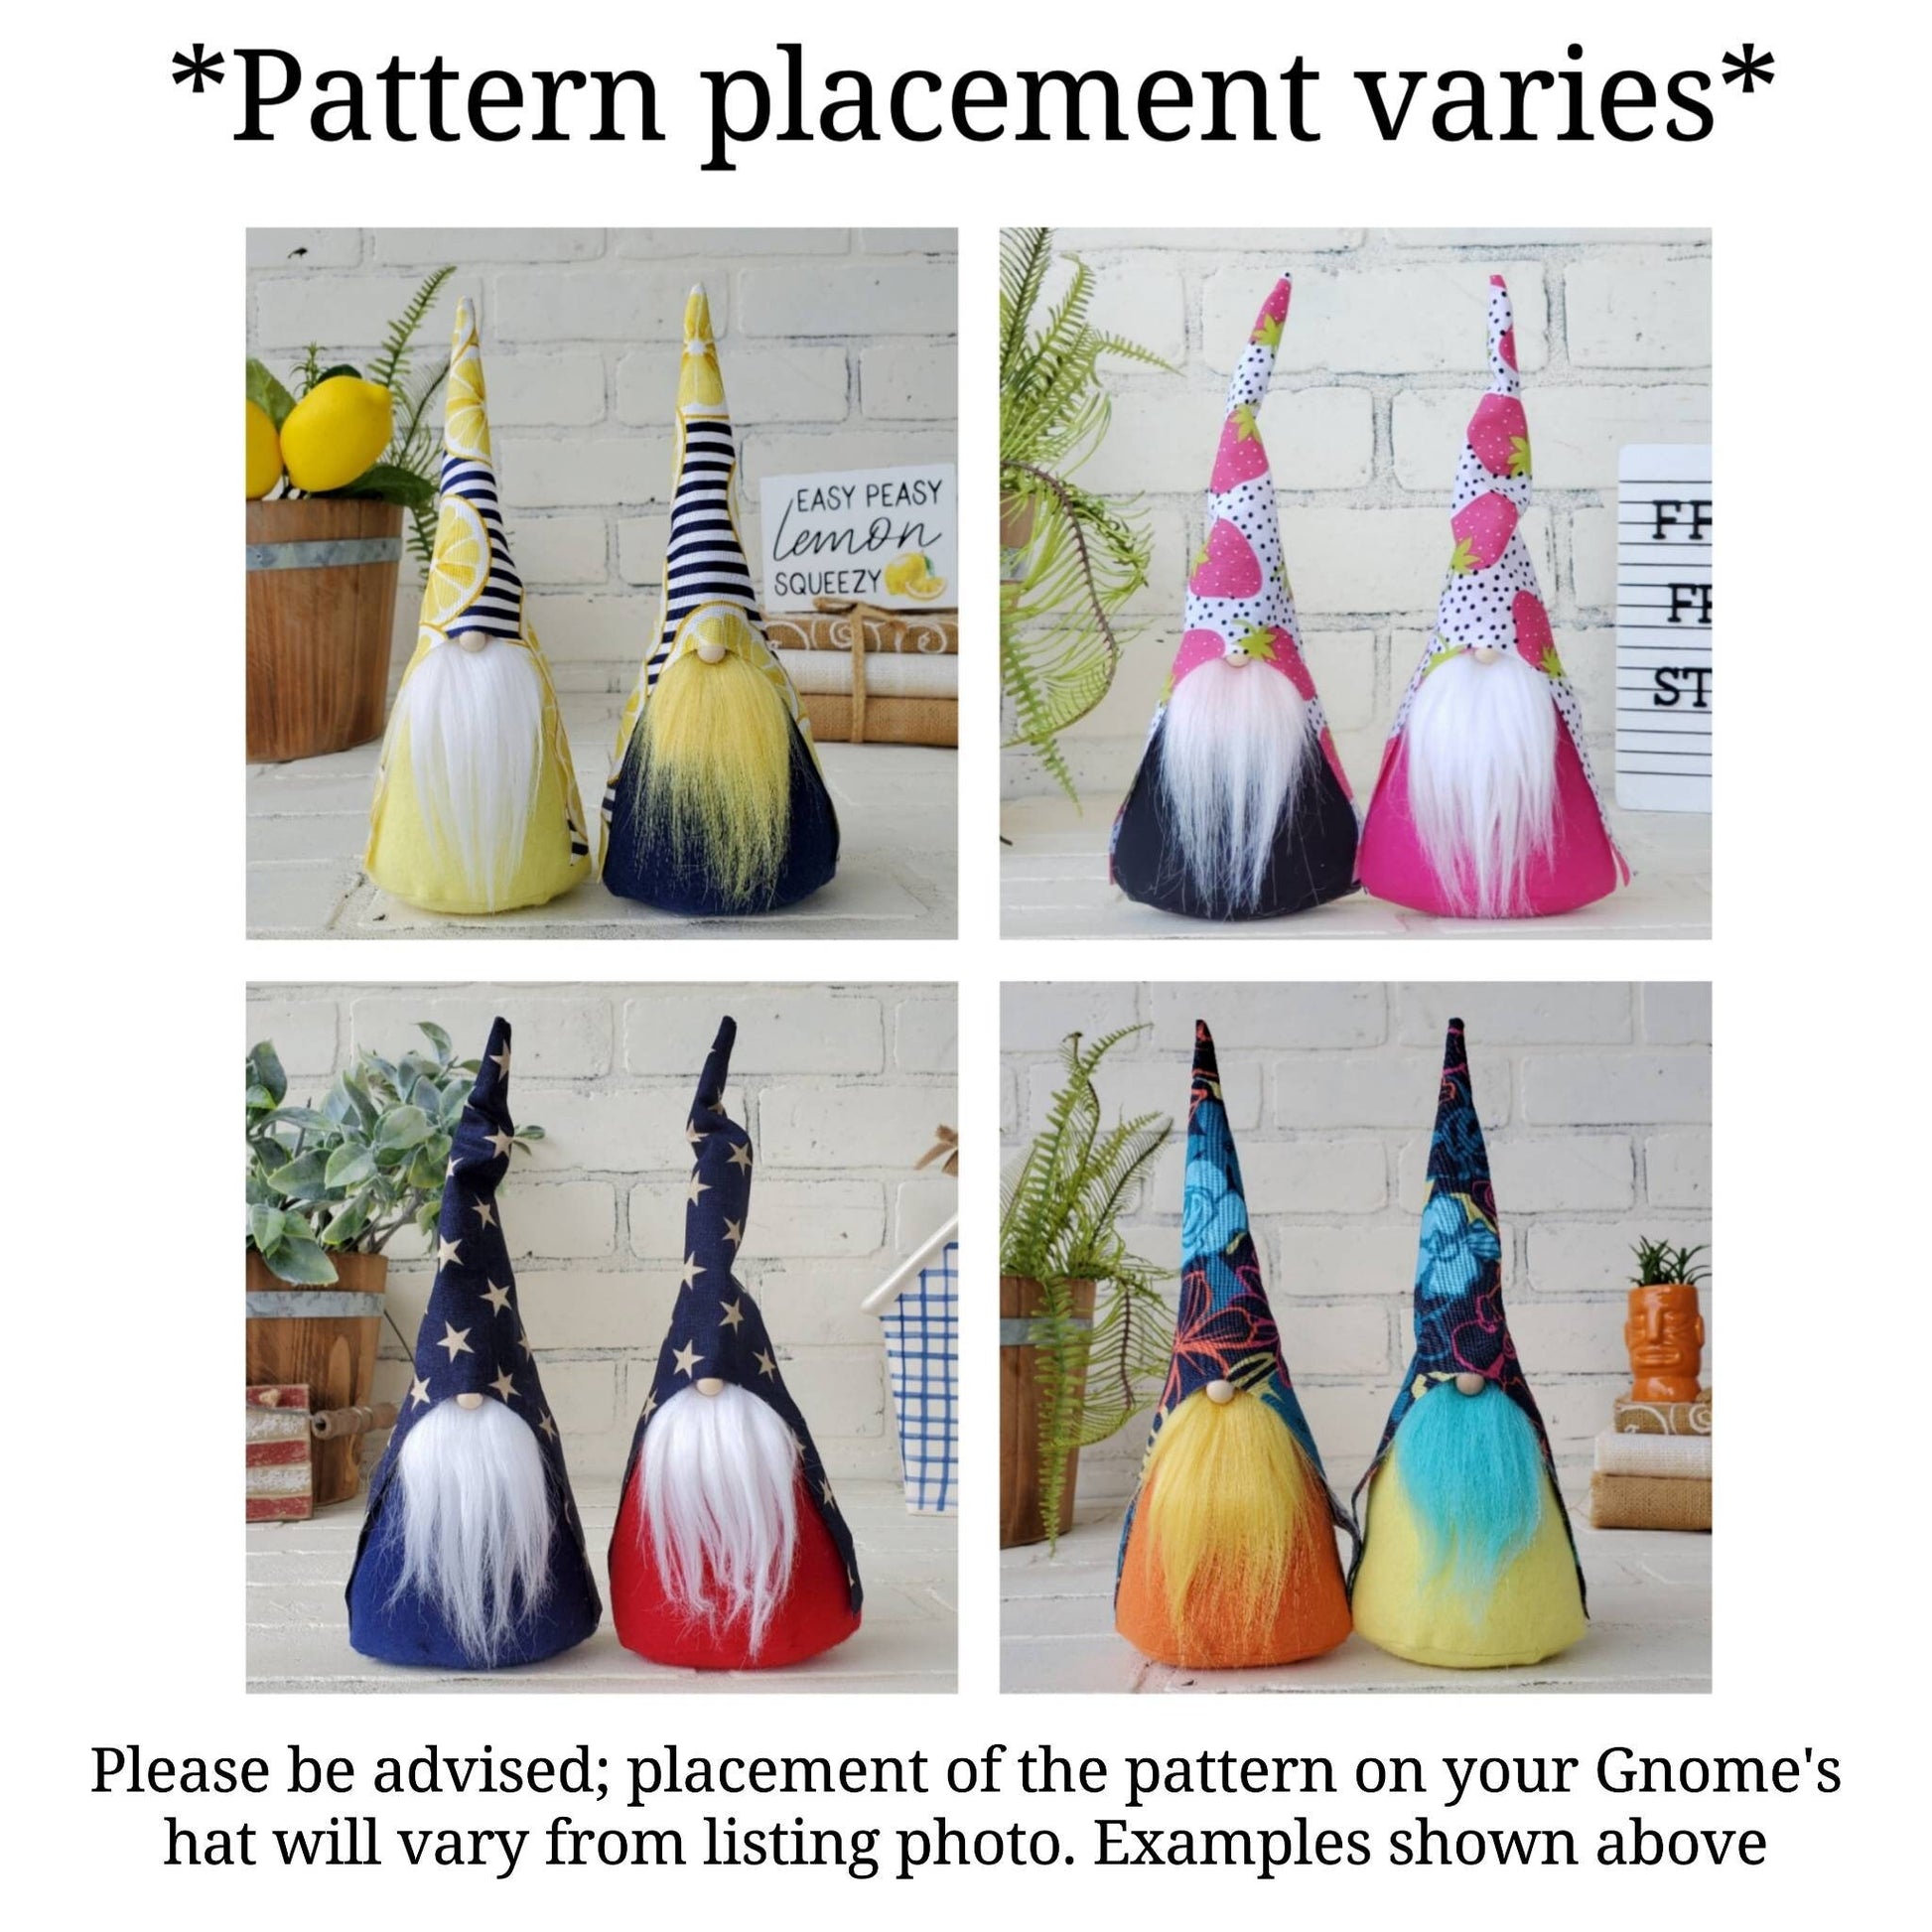 Pattern placement for Gnome Hats may vary from gnome to gnome. Image shows fruit & patriotic gnomes with slight variations to prints to give a visual for minor differences. 